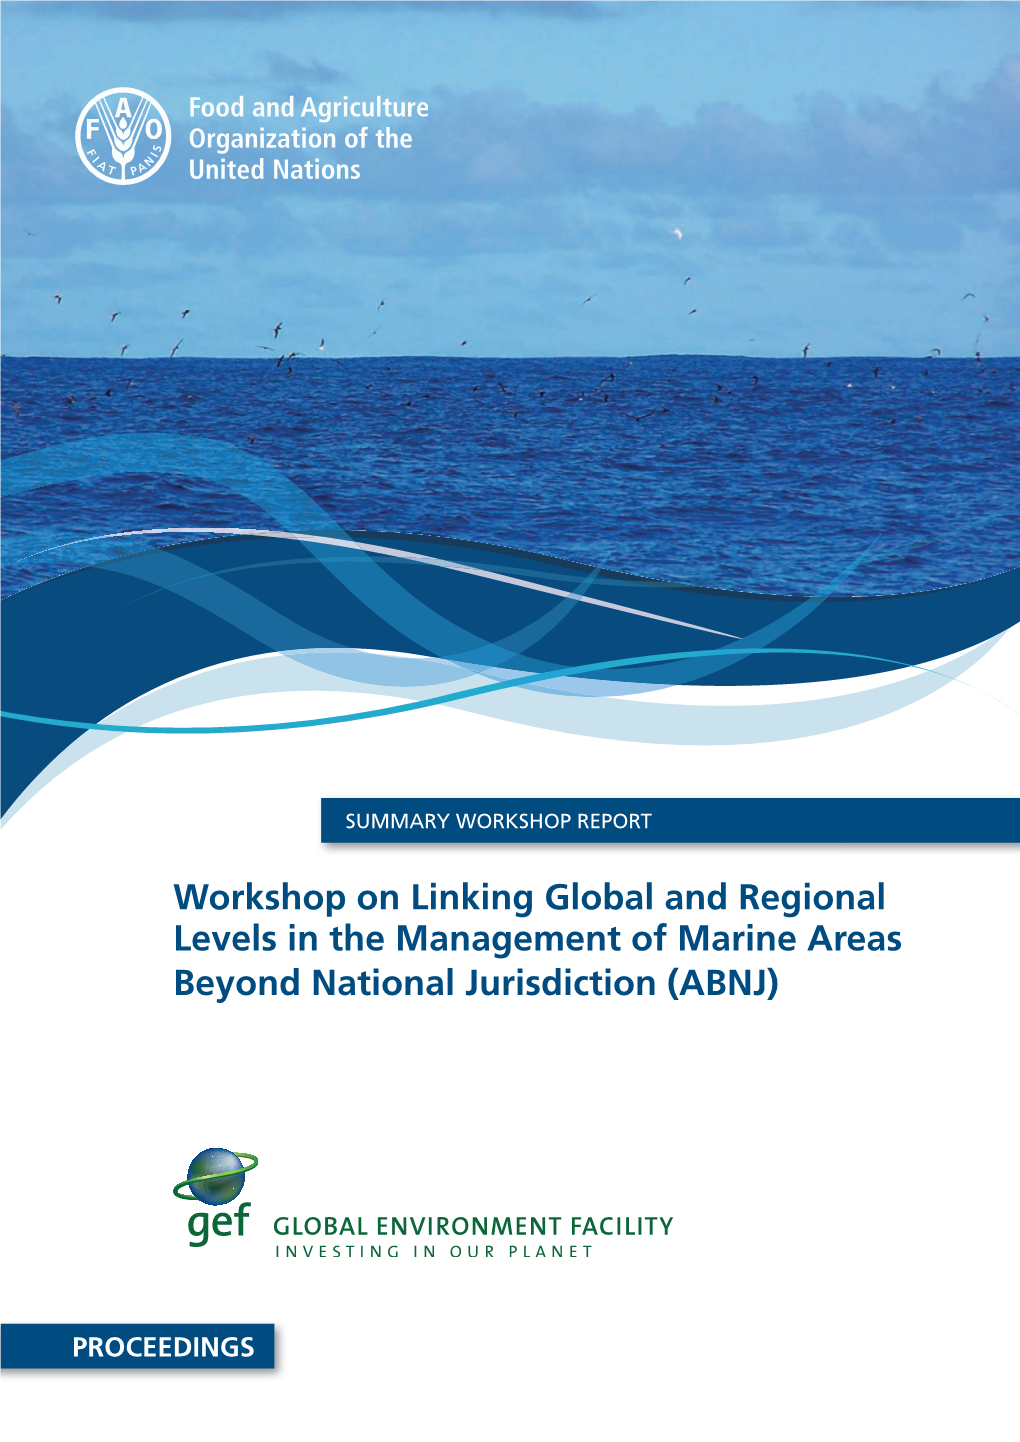 Linking Global and Regional Levels in the Management of Marine Areas Beyond National Jurisdiction (ABNJ)